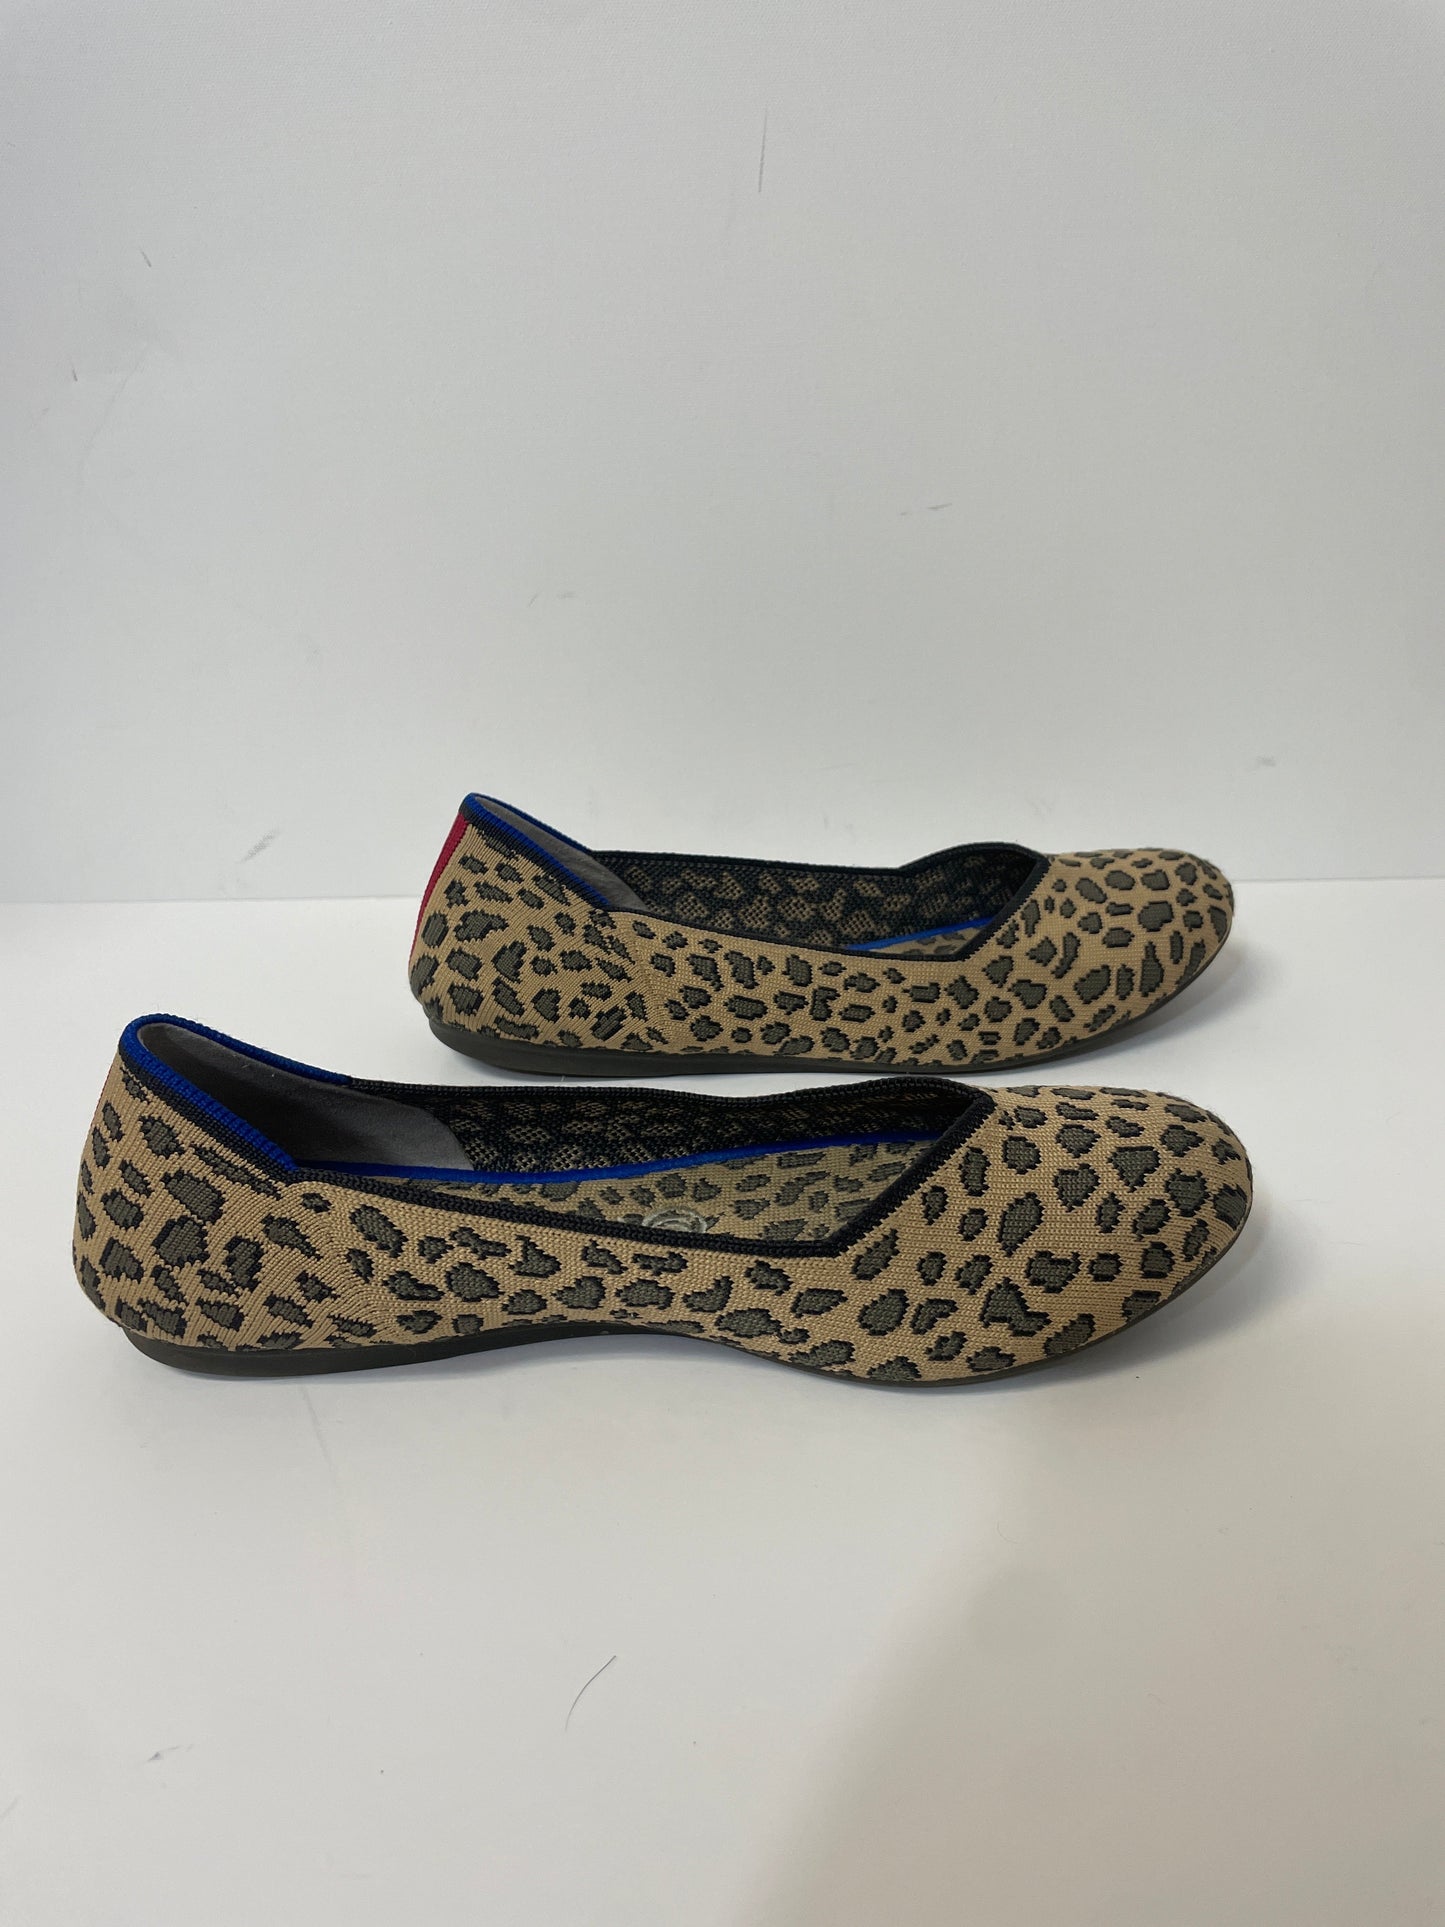 Shoes Flats By Rothys  Size: 8.5